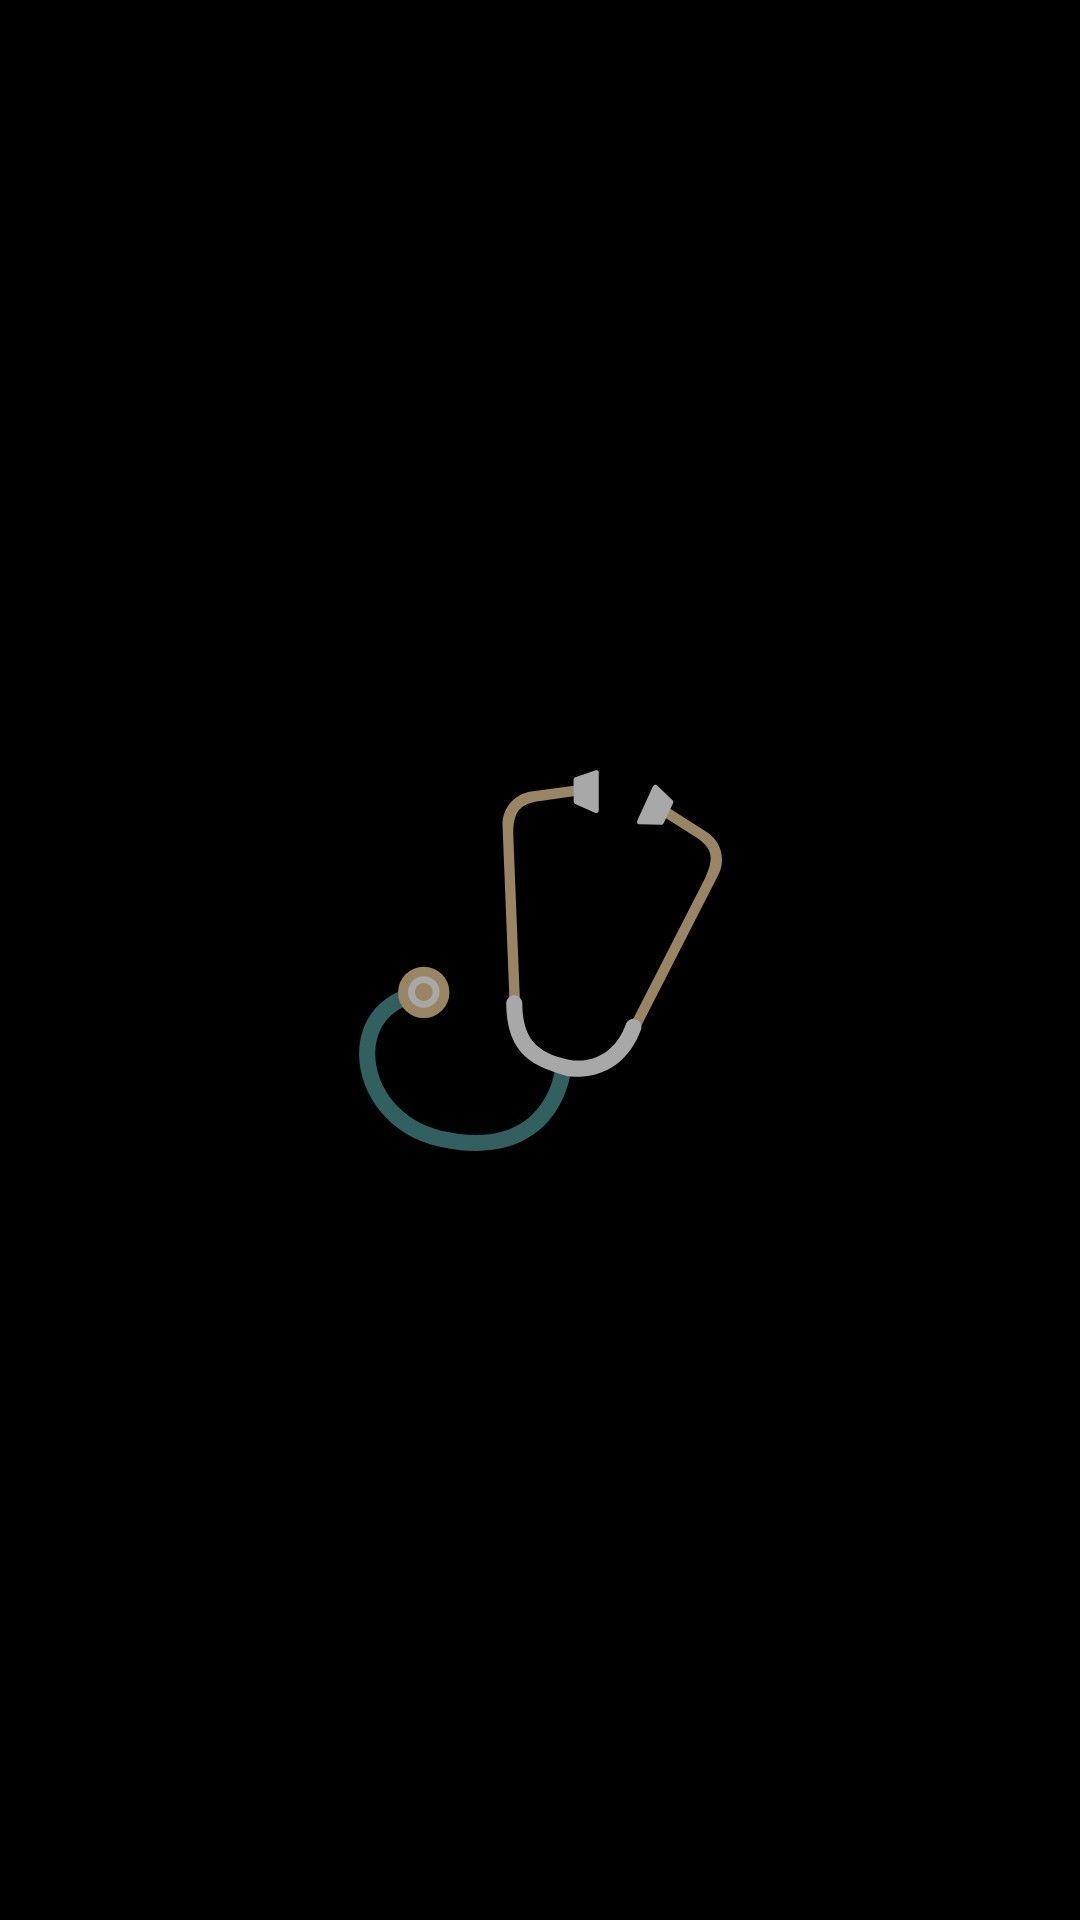 Medical Student - heart strcture Wallpaper Download | MobCup